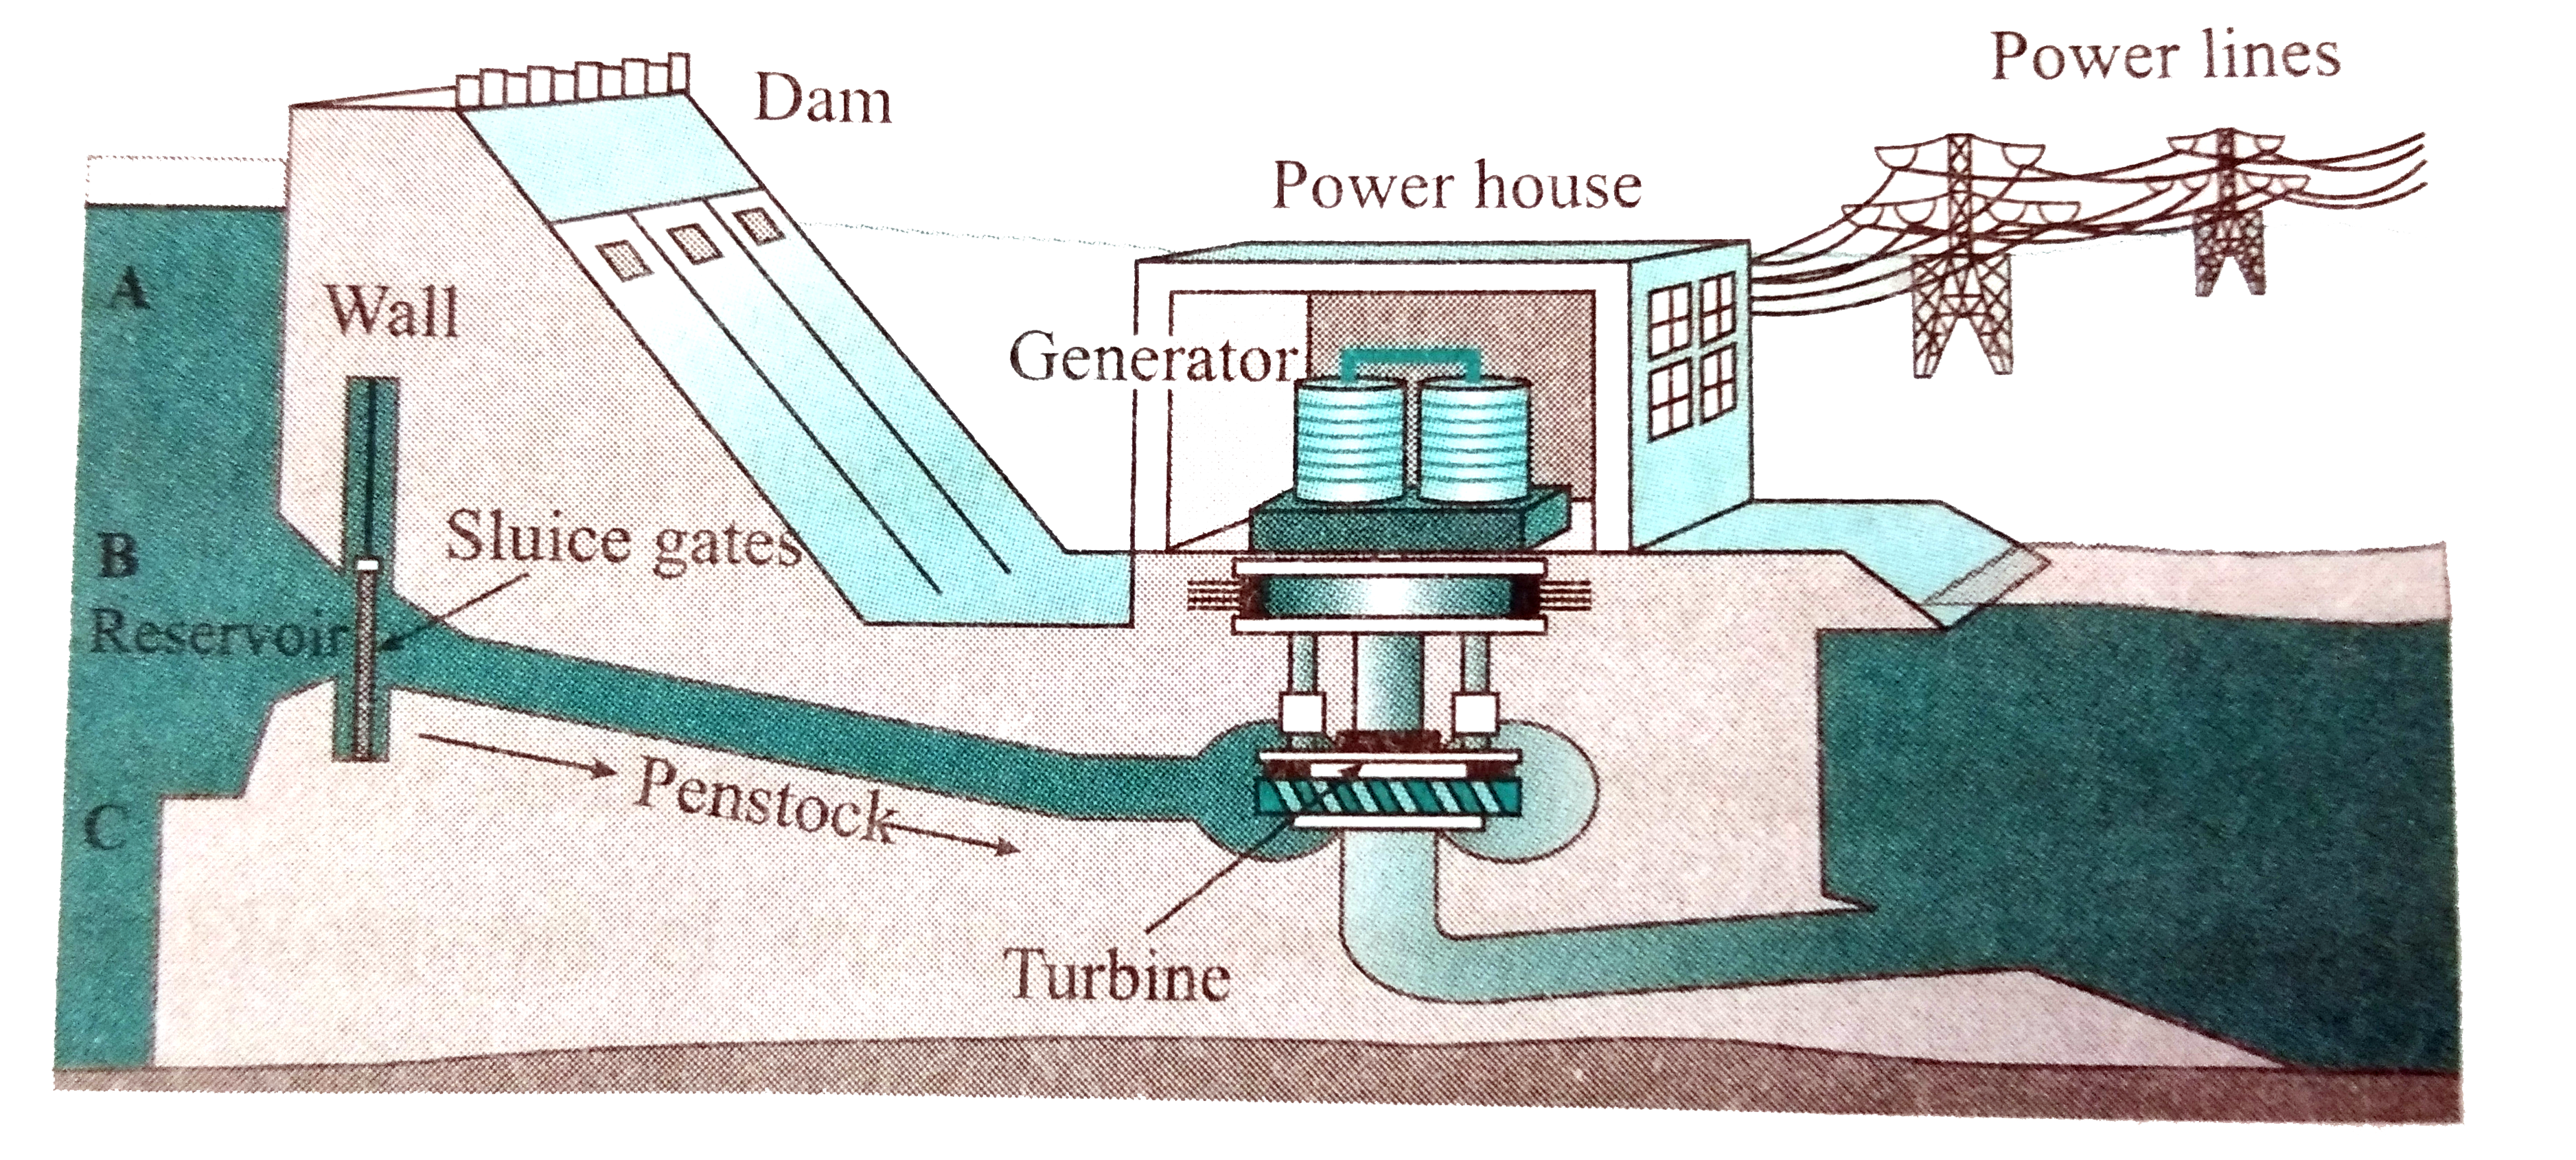 The schematic of hydroelectric plant is shown in Figure 5.17 on textbook . Water from about middle of the total height of the dam is taken to the turbine, as shown by point B in the diagram.    With reference to point B, potential energy of how much water reservoir in the dam will be converted into kinetic energy?